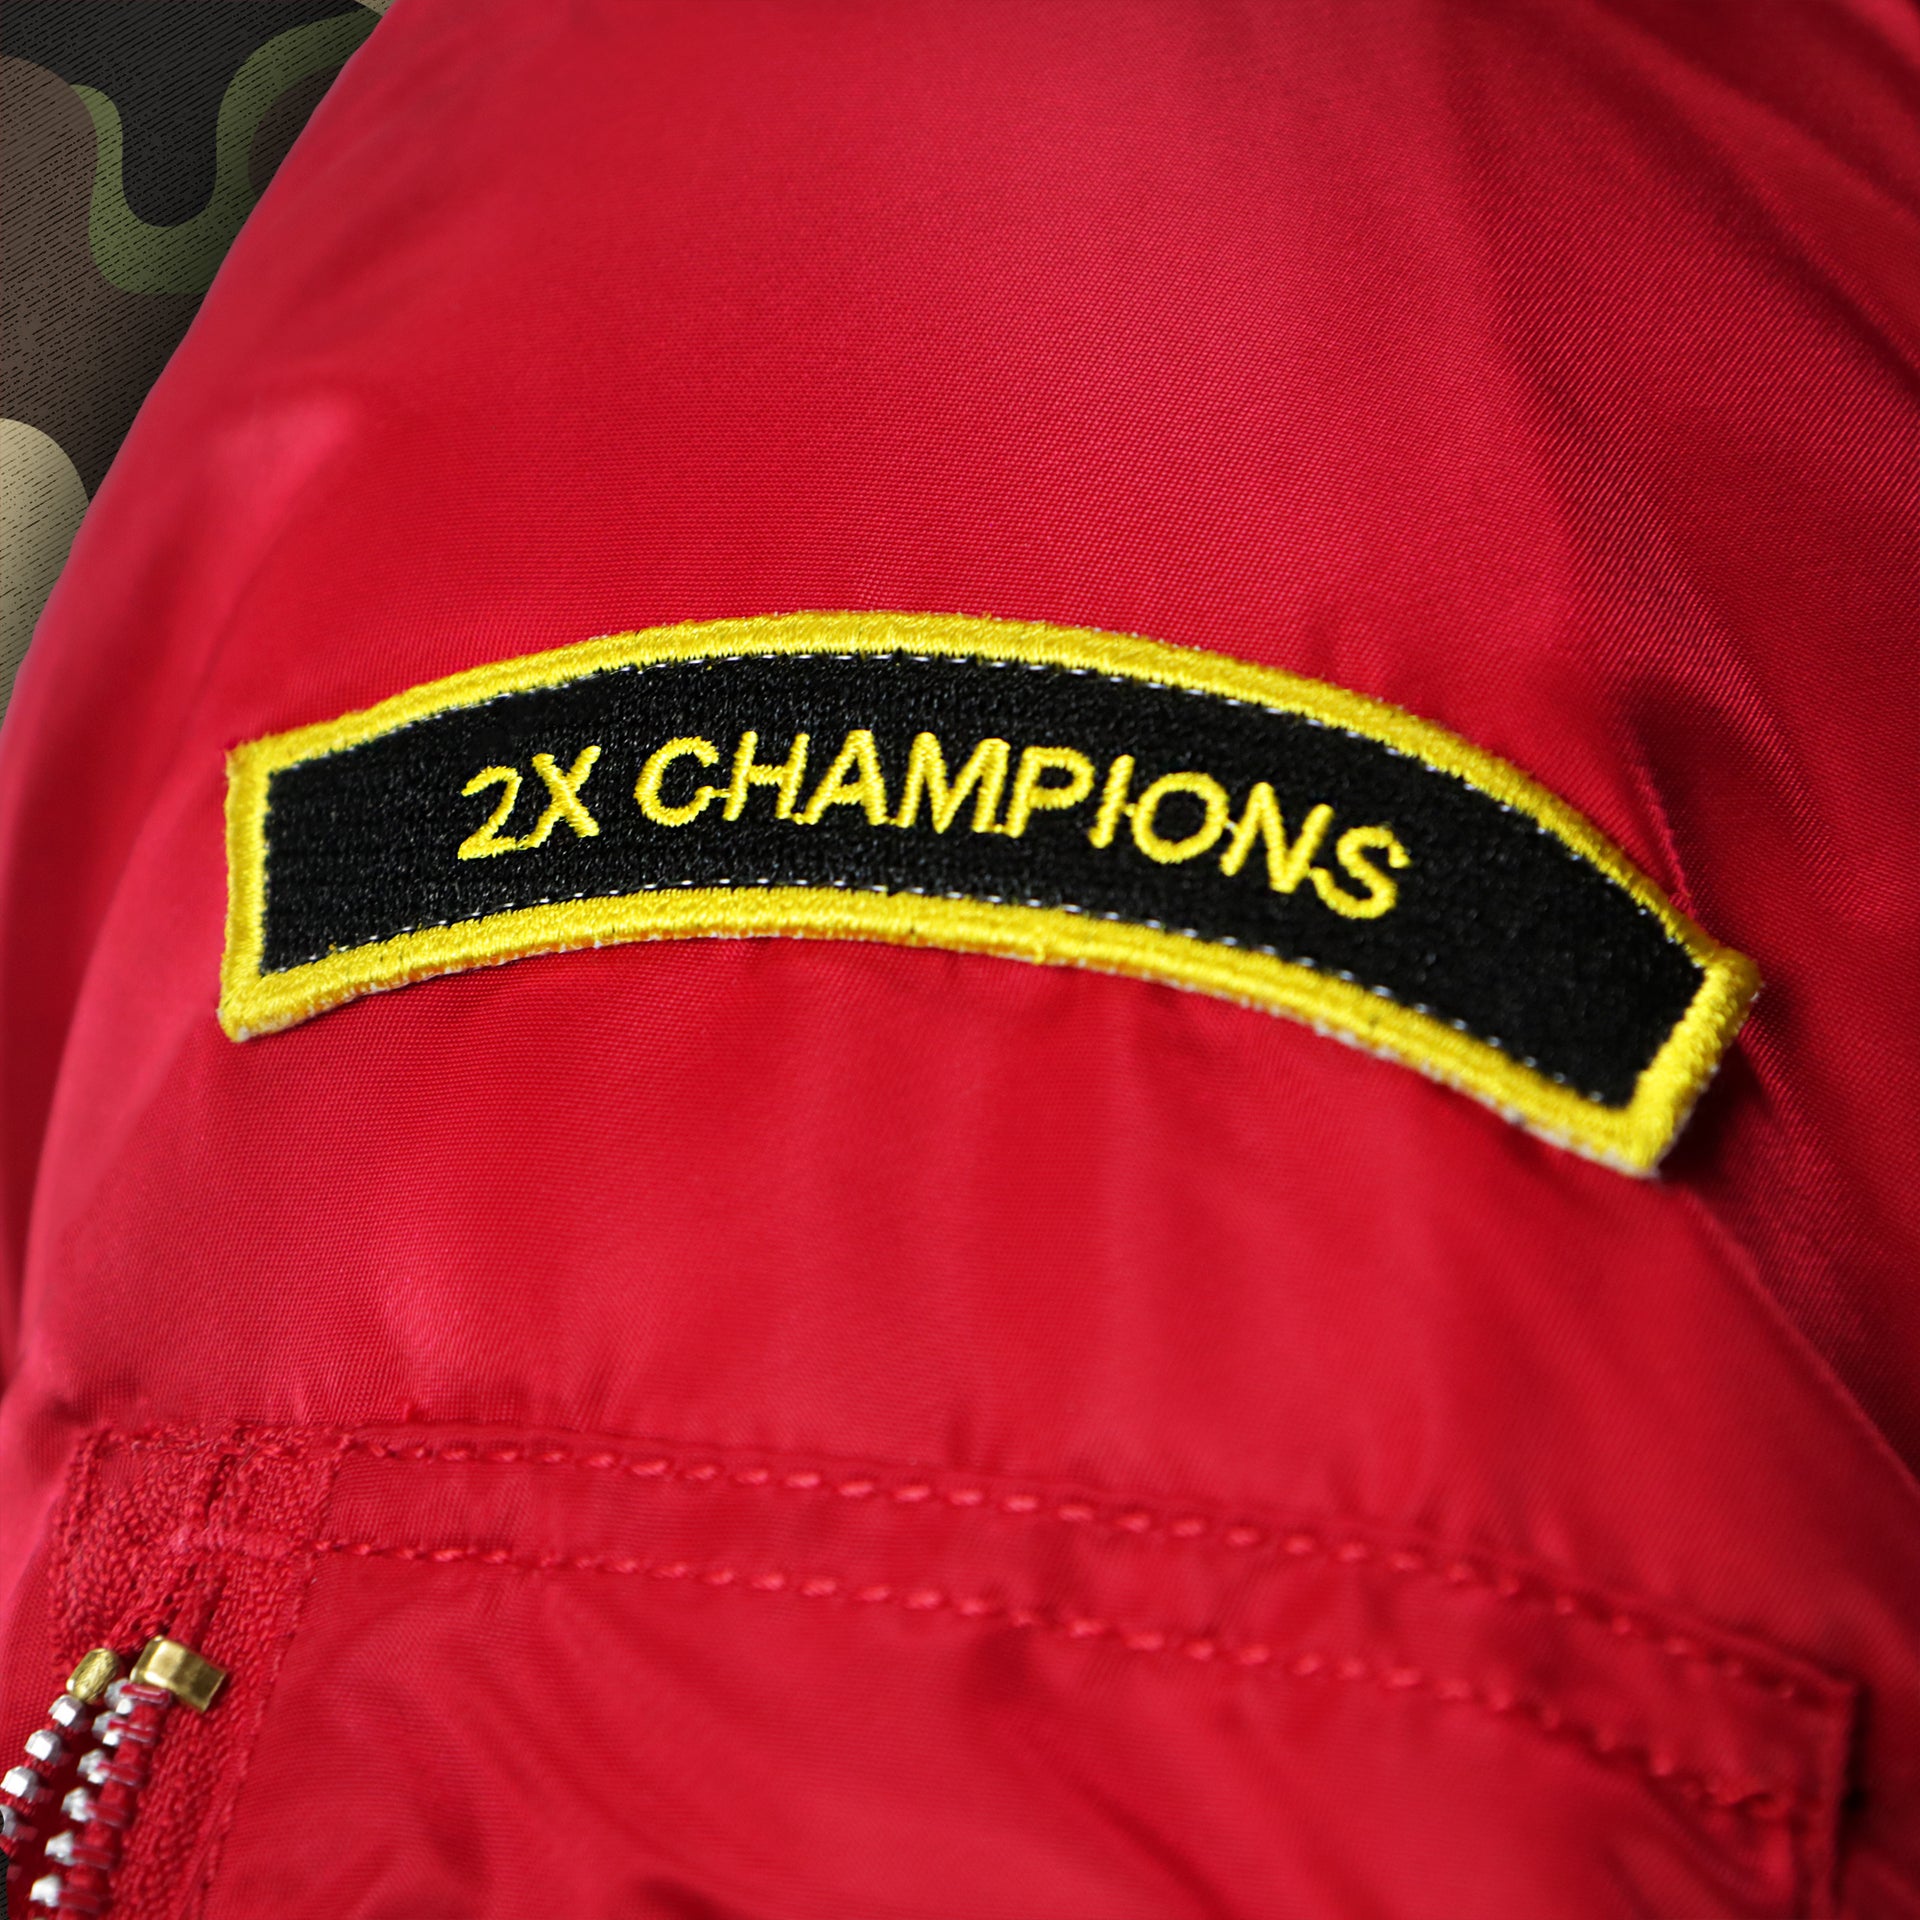 The 2X Champions Side Patch on the Philadelphia Phillies MLB Patch Alpha Industries Reversible Bomber Jacket With Camo Liner | Red Bomber Jacket